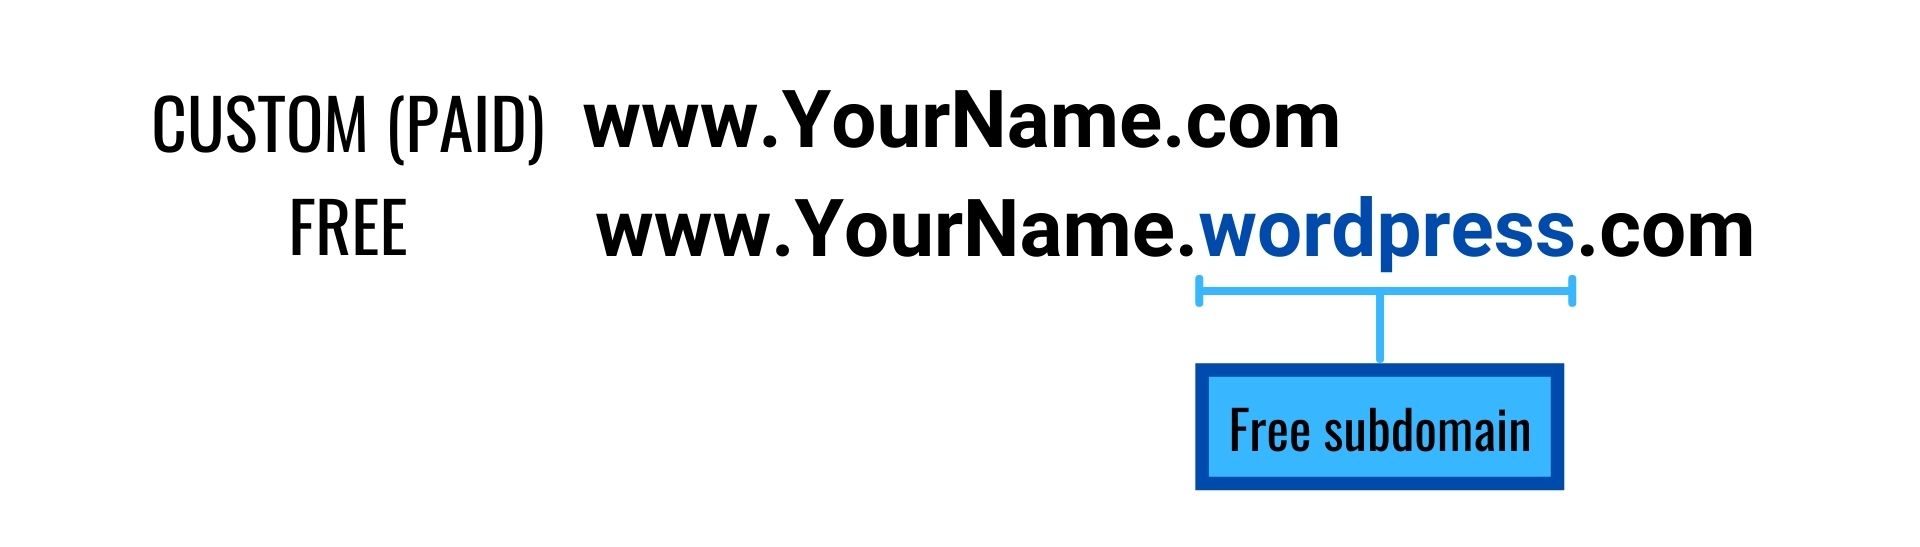 Free sub-domain name in the URL structure